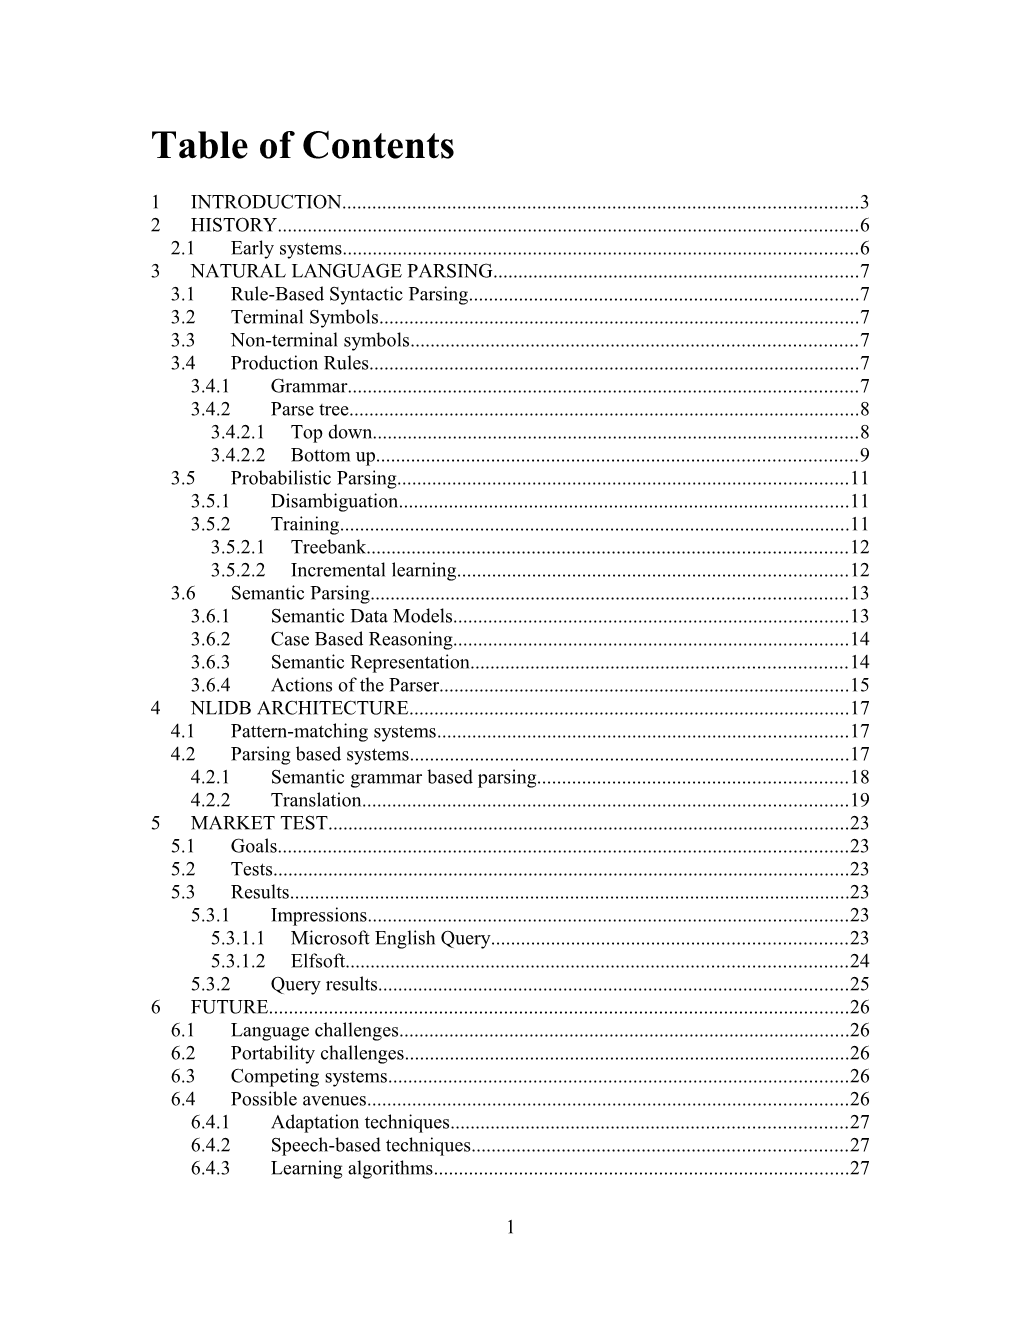 Table of Contents s462